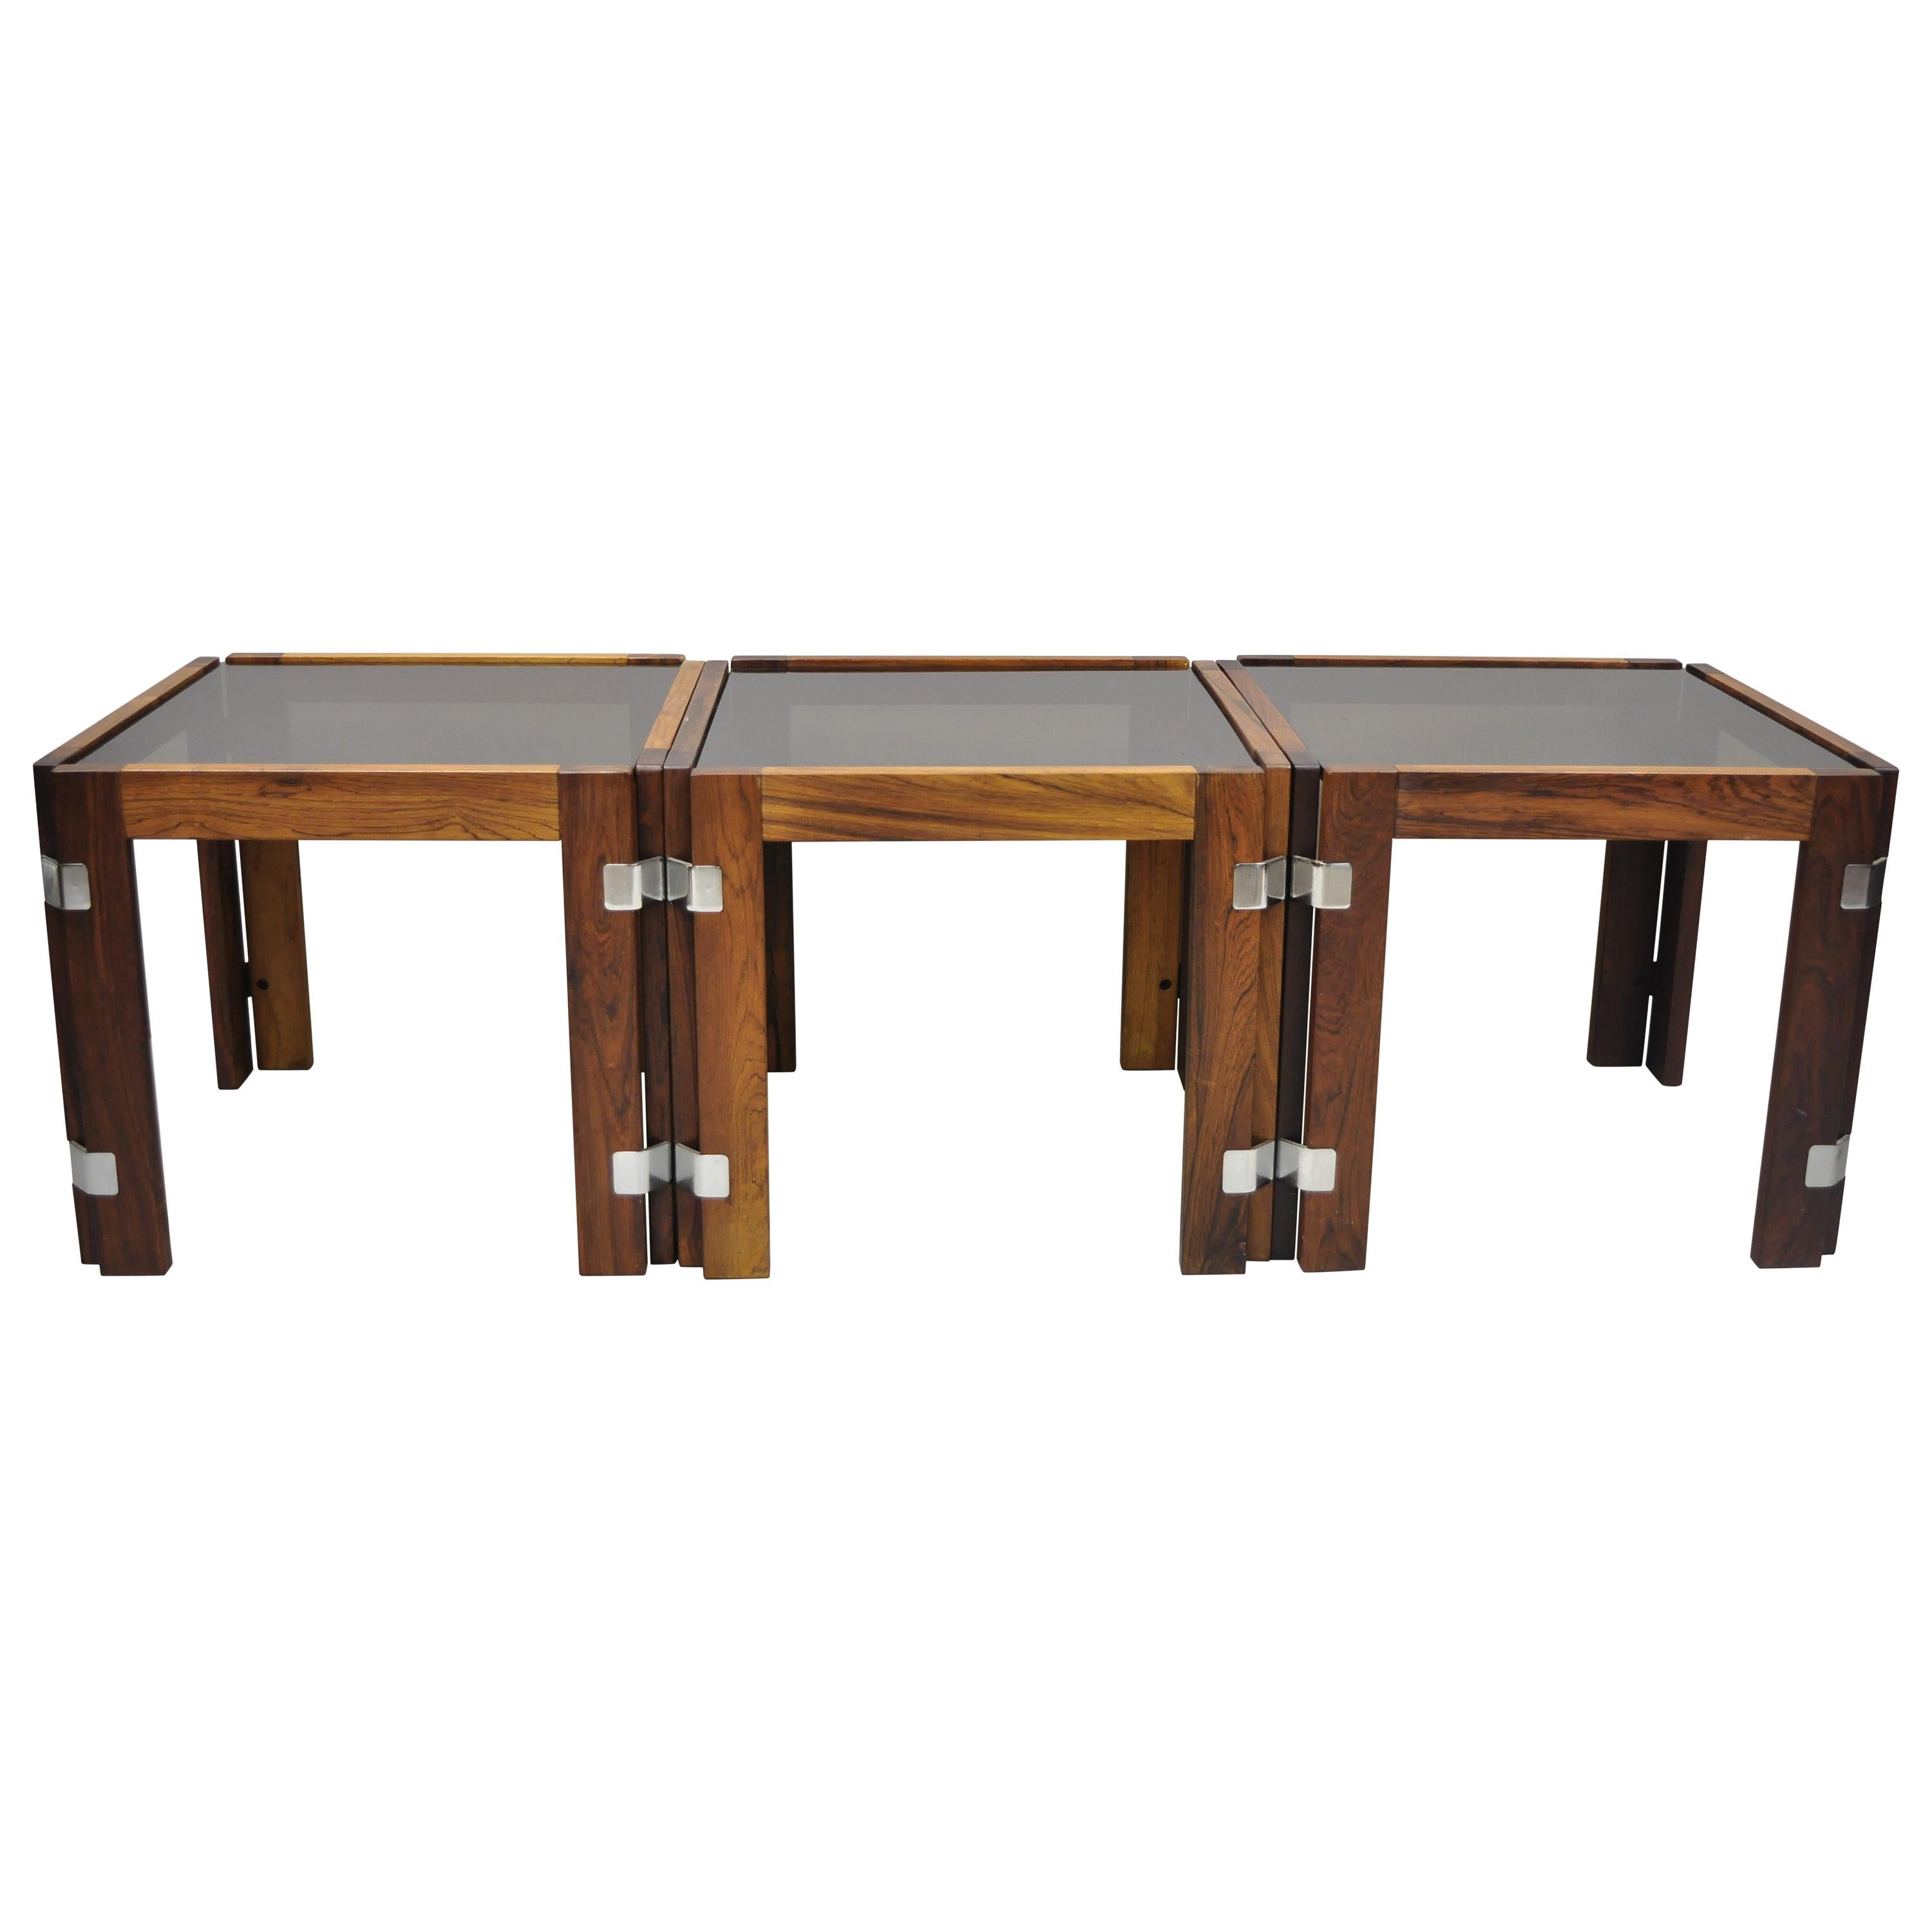 3 Midcentury Danish Modern Rosewood & Smoked Glass Side Tables by Interior Form